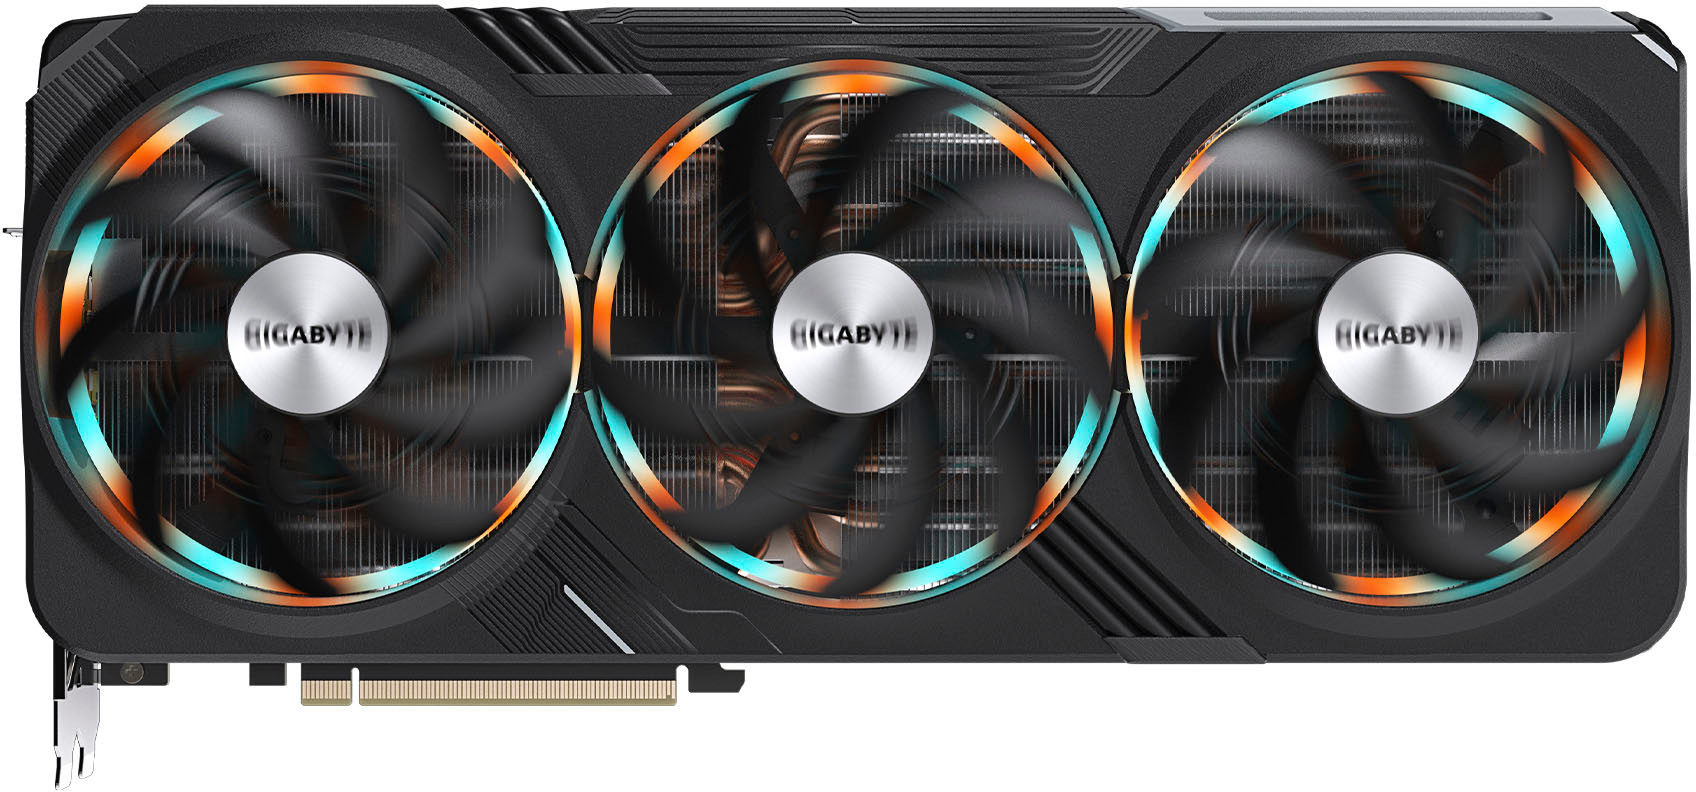 GPU Buying Guide: How To Choose the Right Graphics Card